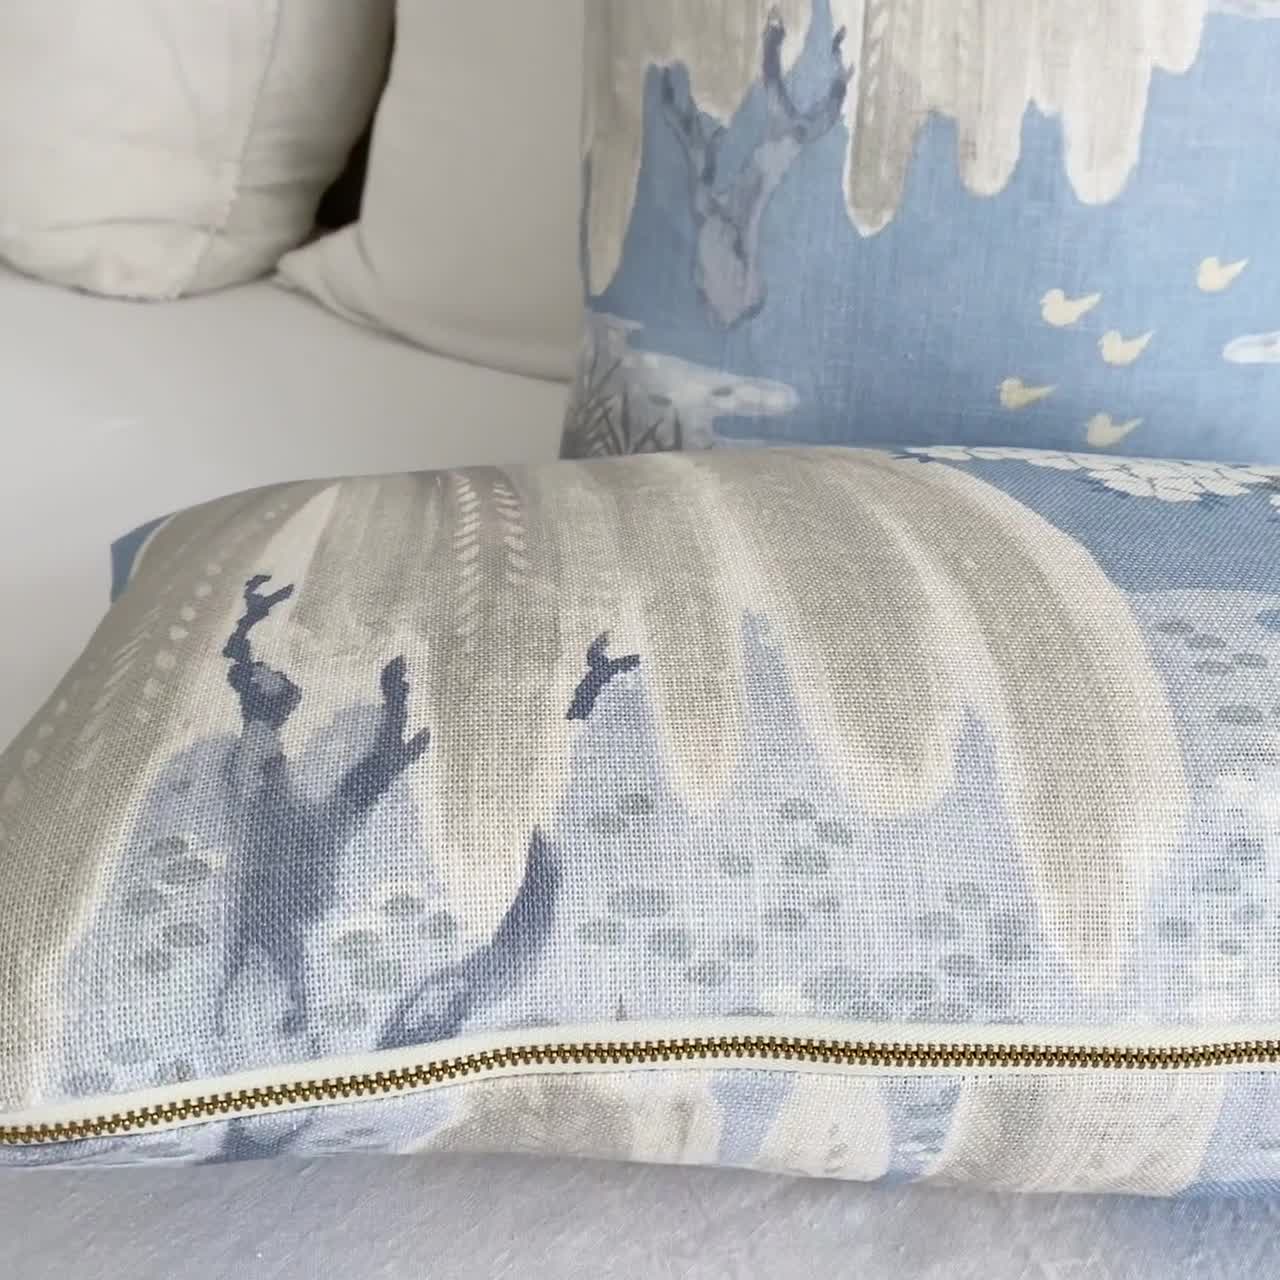 https://v.etsystatic.com/video/upload/q_auto/Thibaut-Willow-Tree-AF23108-Soft-Blue-Chinoiserie-Printed-Floral-Decorative-Throw-Pillow-Cover-Product-Video_pjokki.jpg